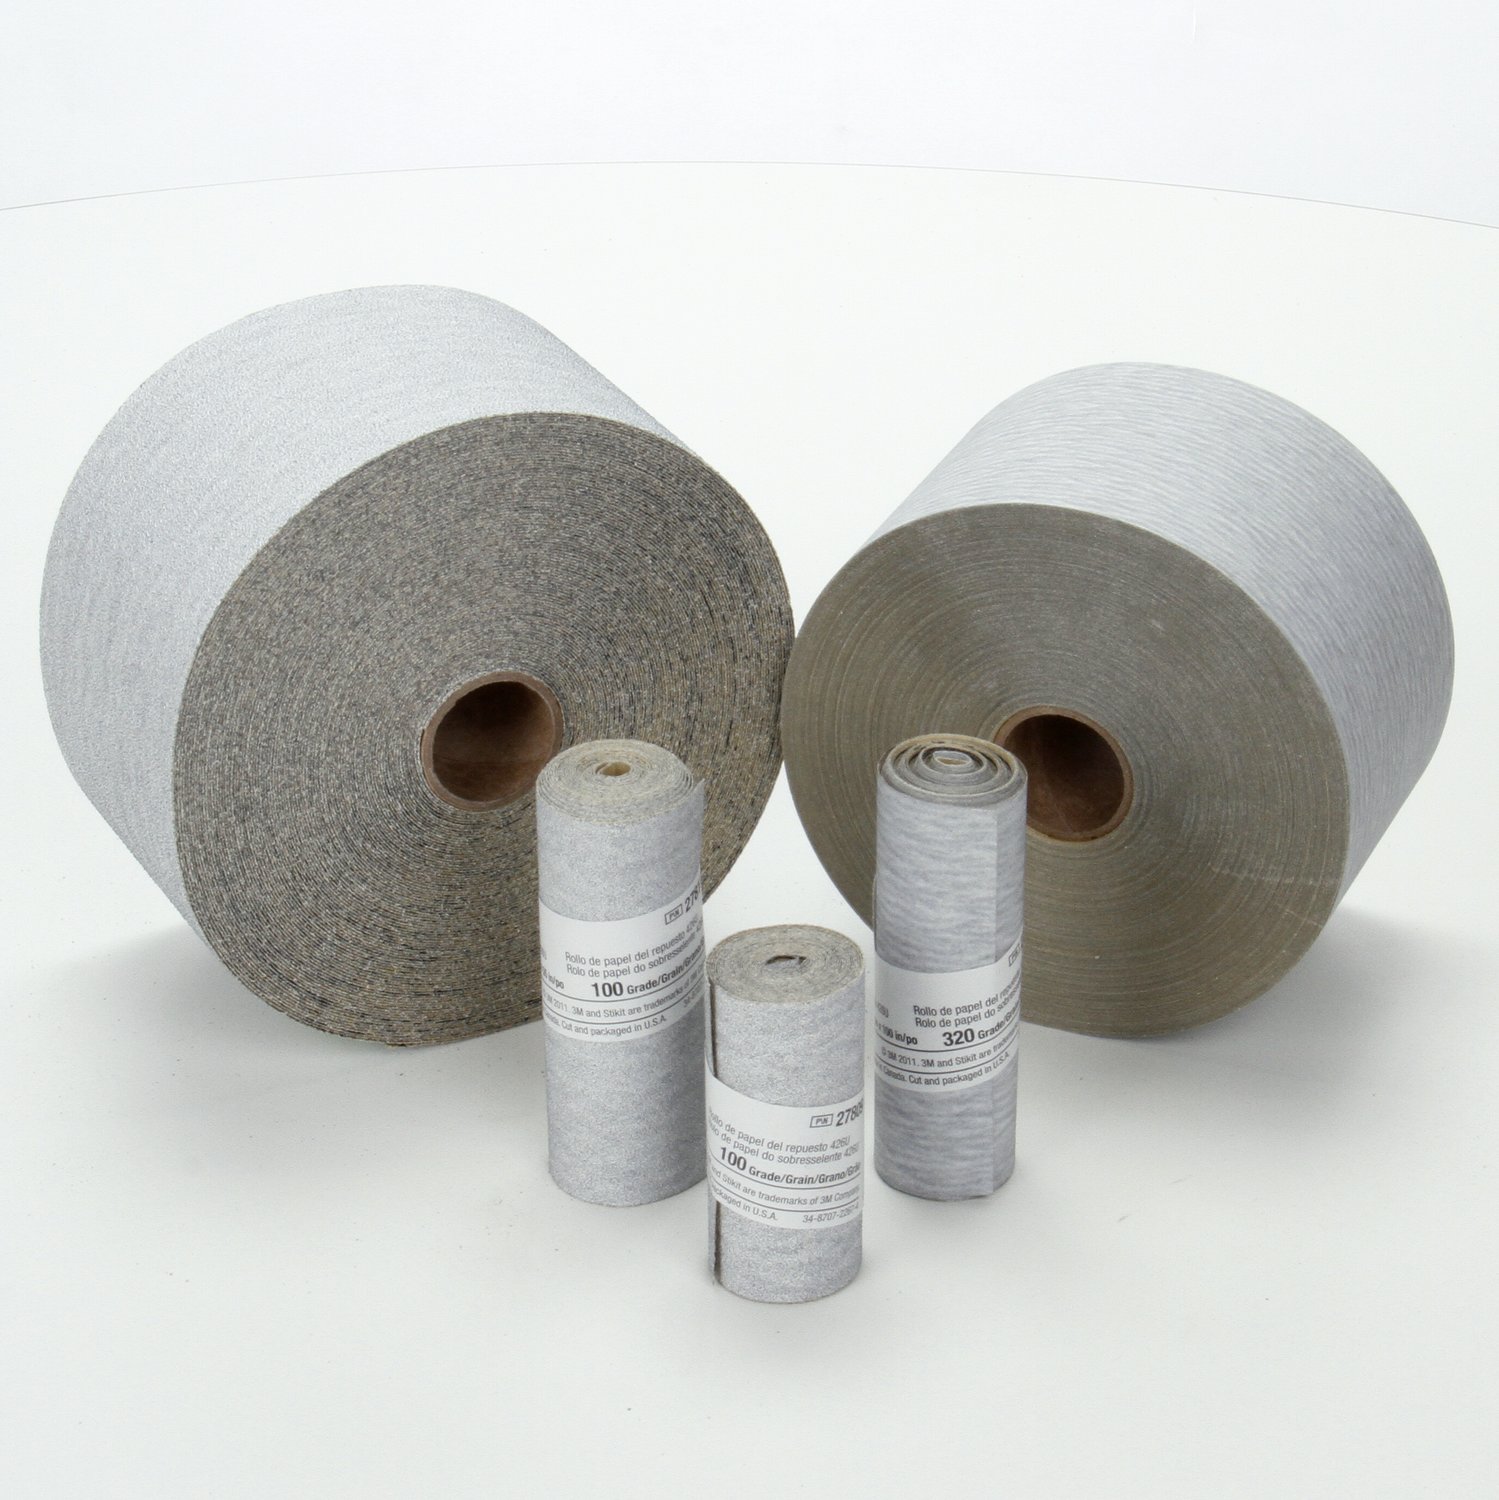 7100070174 - 3M Stikit Paper Roll 426U, 400 A-weight, Config